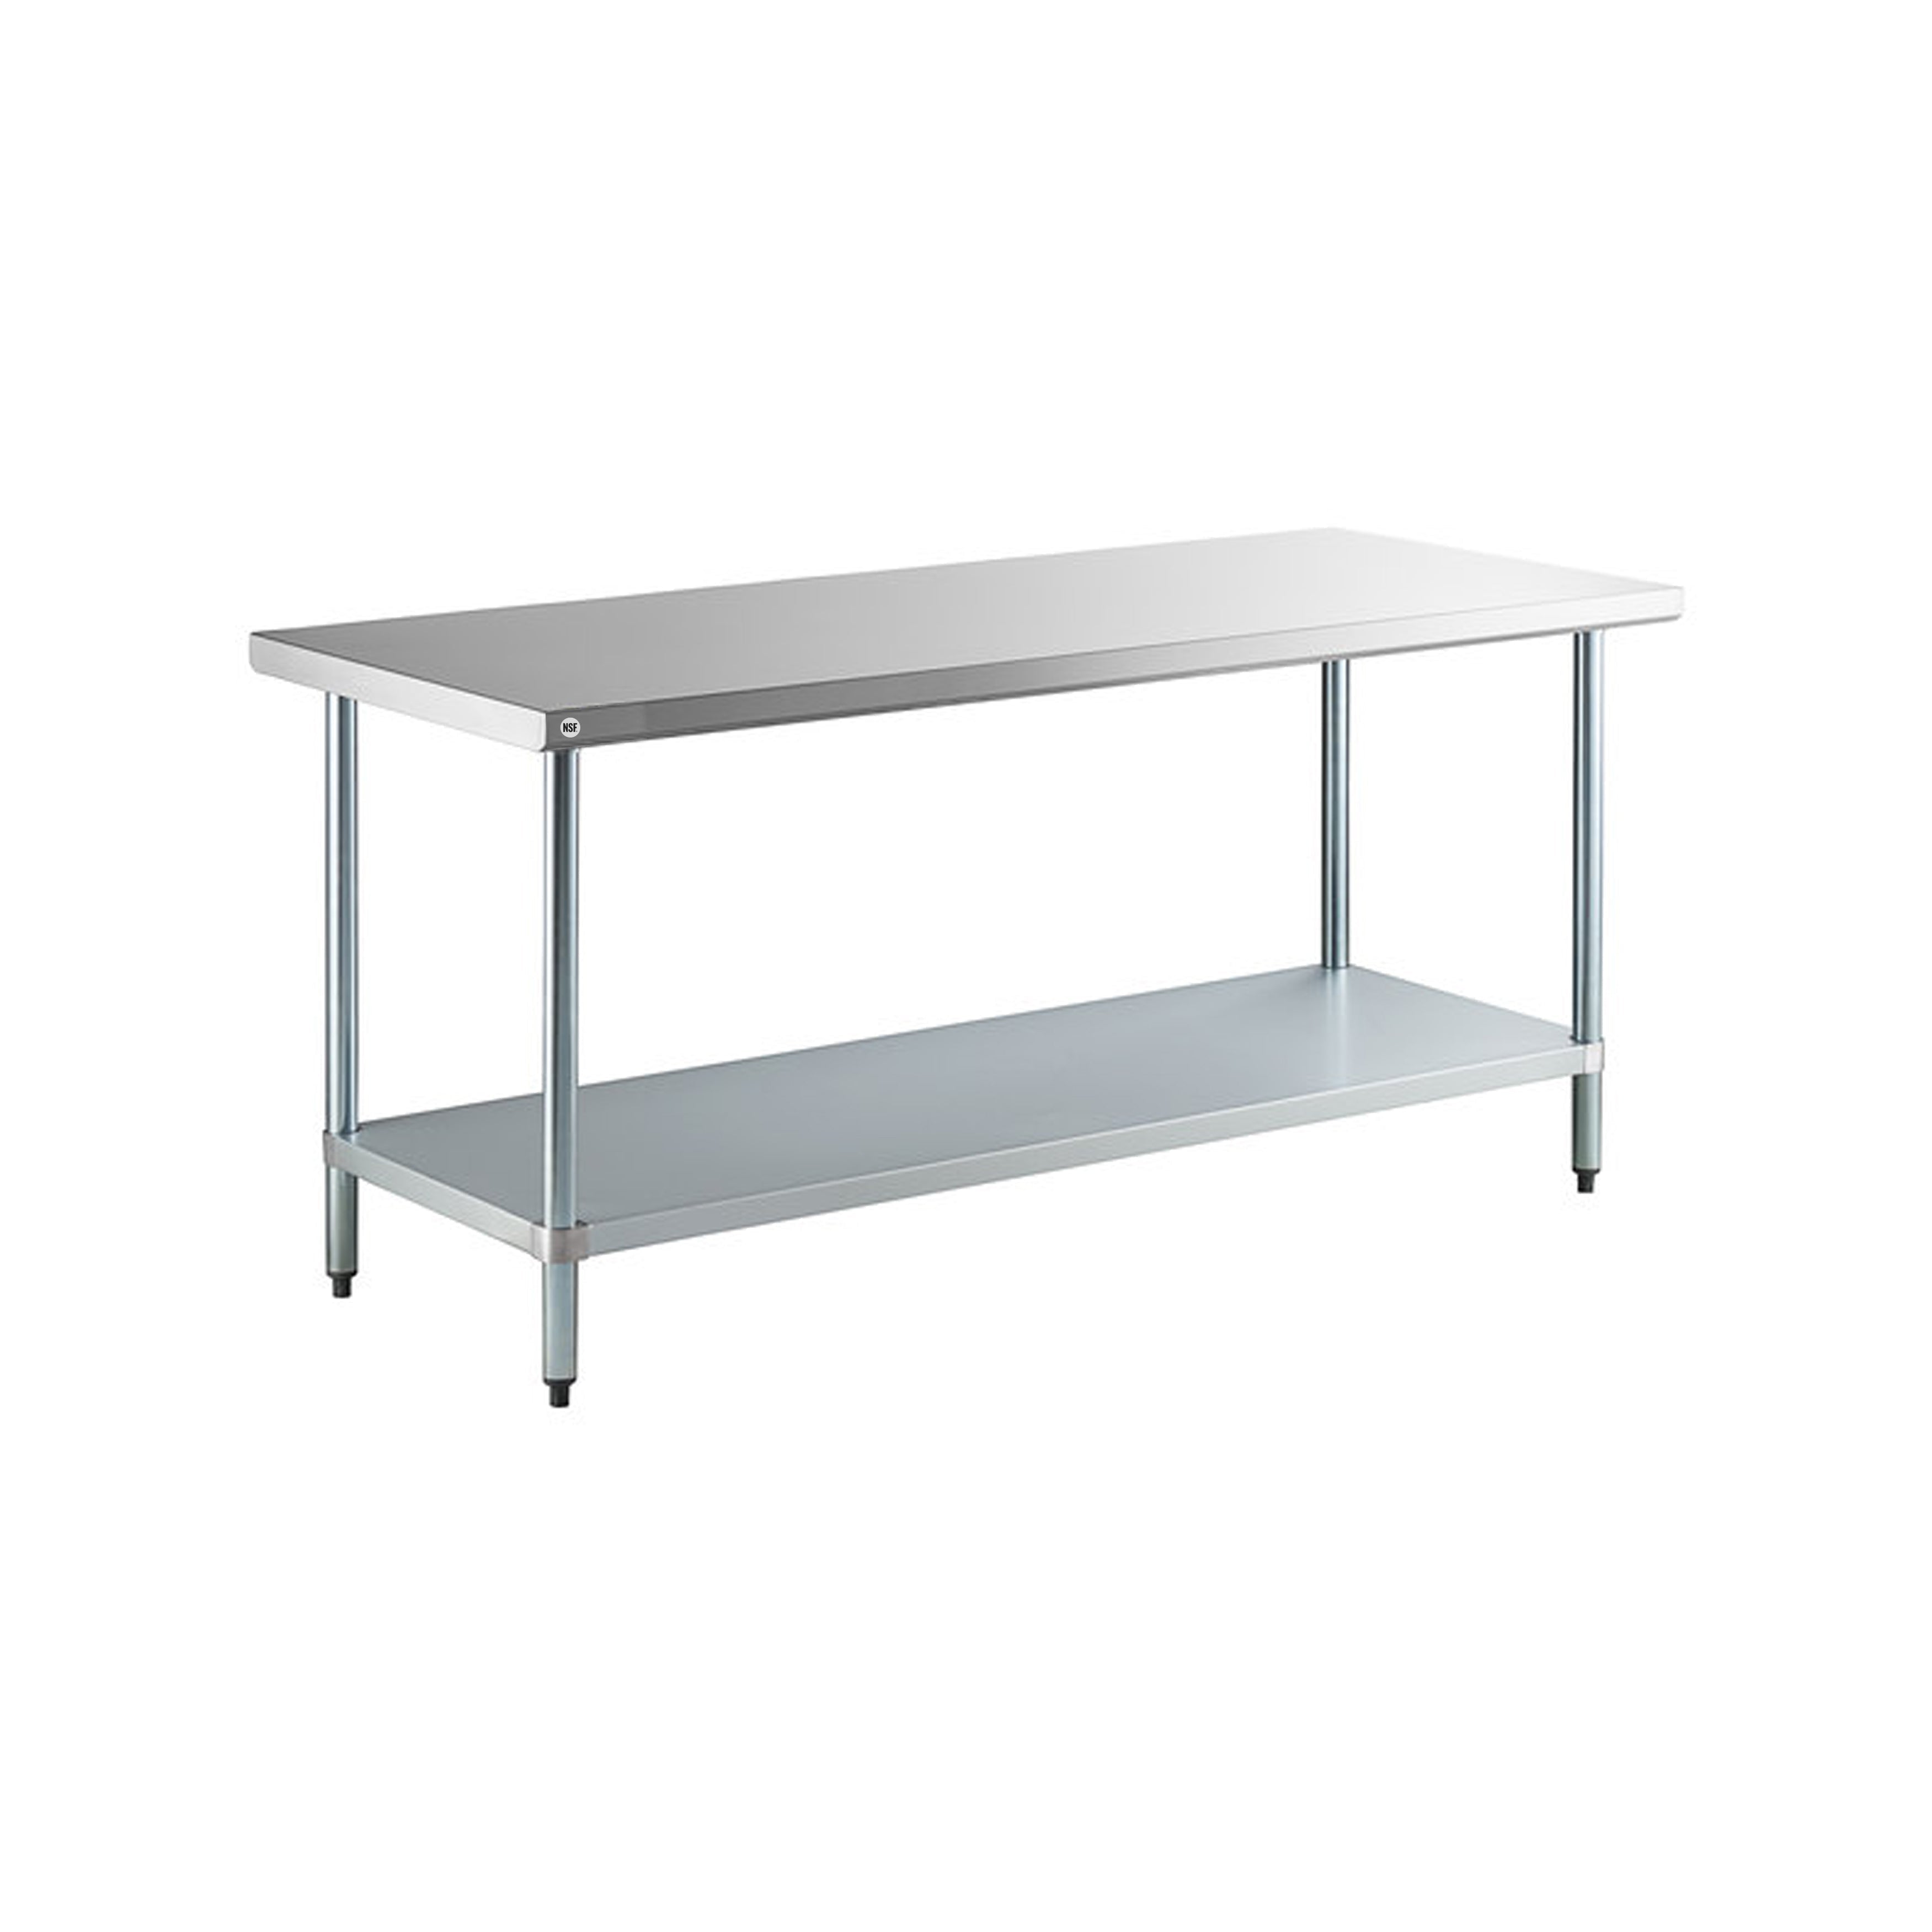 Omcan - 17588, Commercial 72" x 30" Stainless Steel Kitchen Work Table 1300lbs Medium Duty